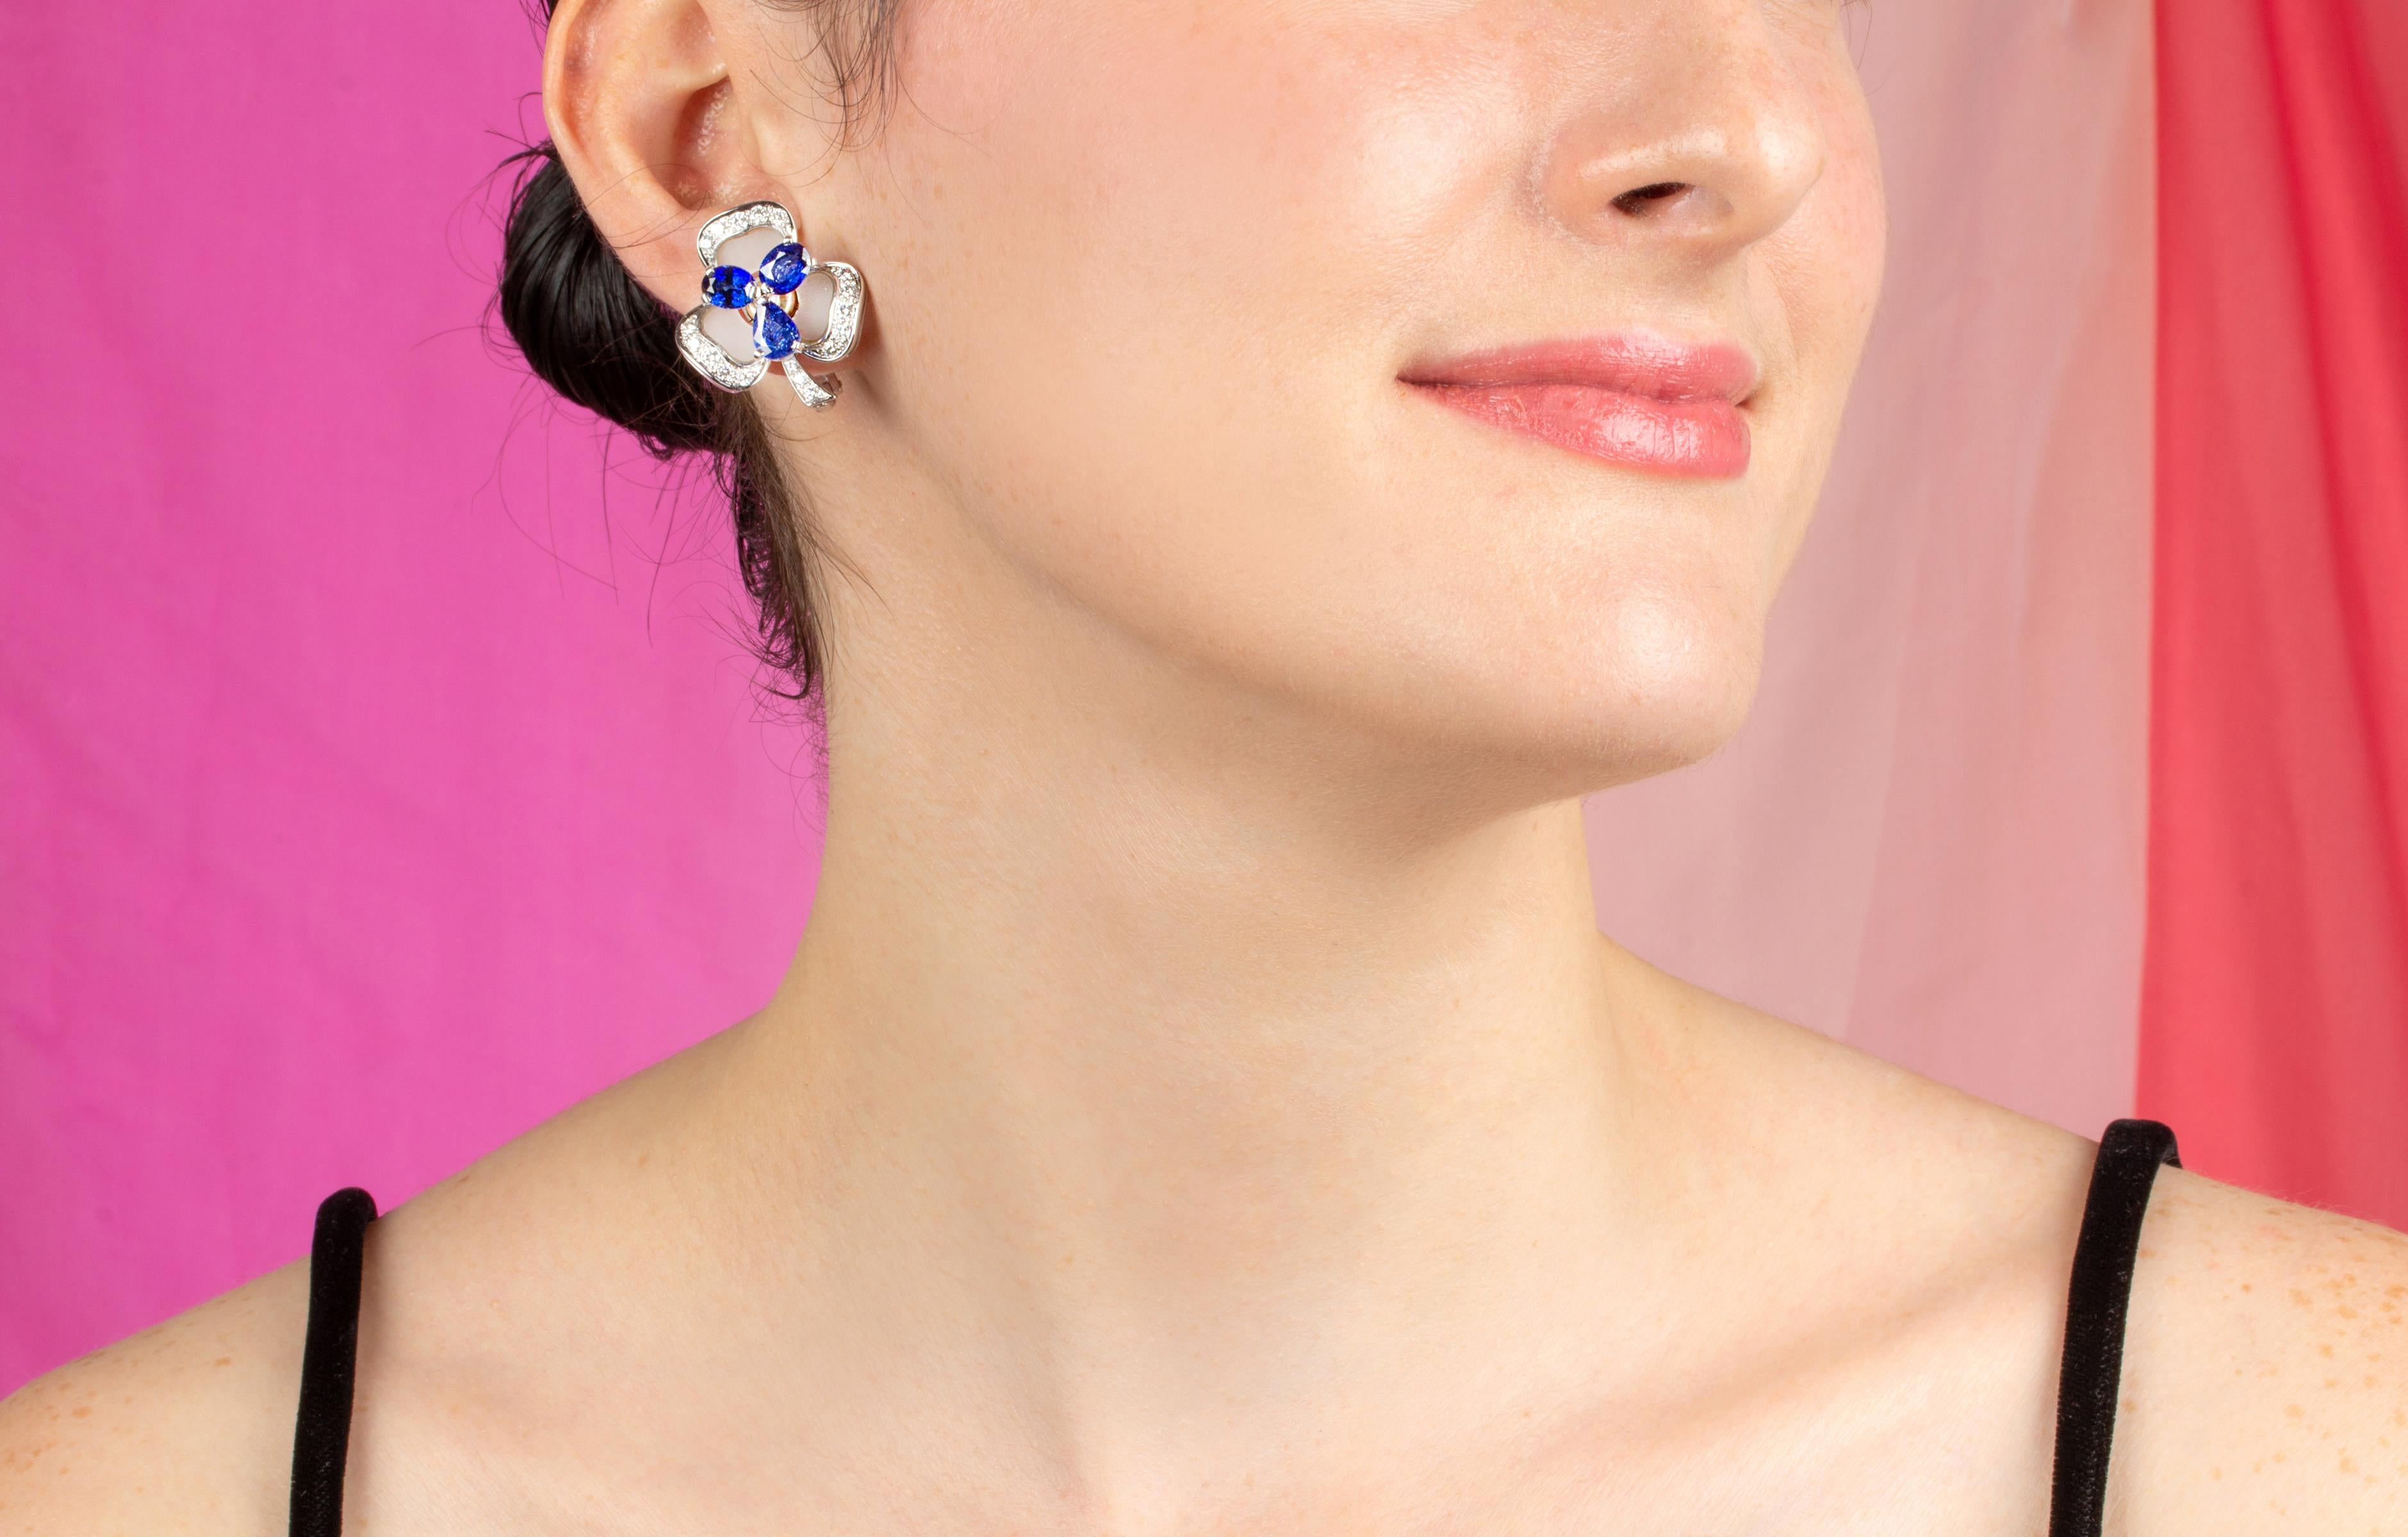 The blue sapphire and diamond earrings feature a flower design with oval cut faceted Ceylon sapphires for a total weight of 7.93 carats. The sapphires are set en tremblant, a technique rarely practiced today. The design is complete with a custom cut